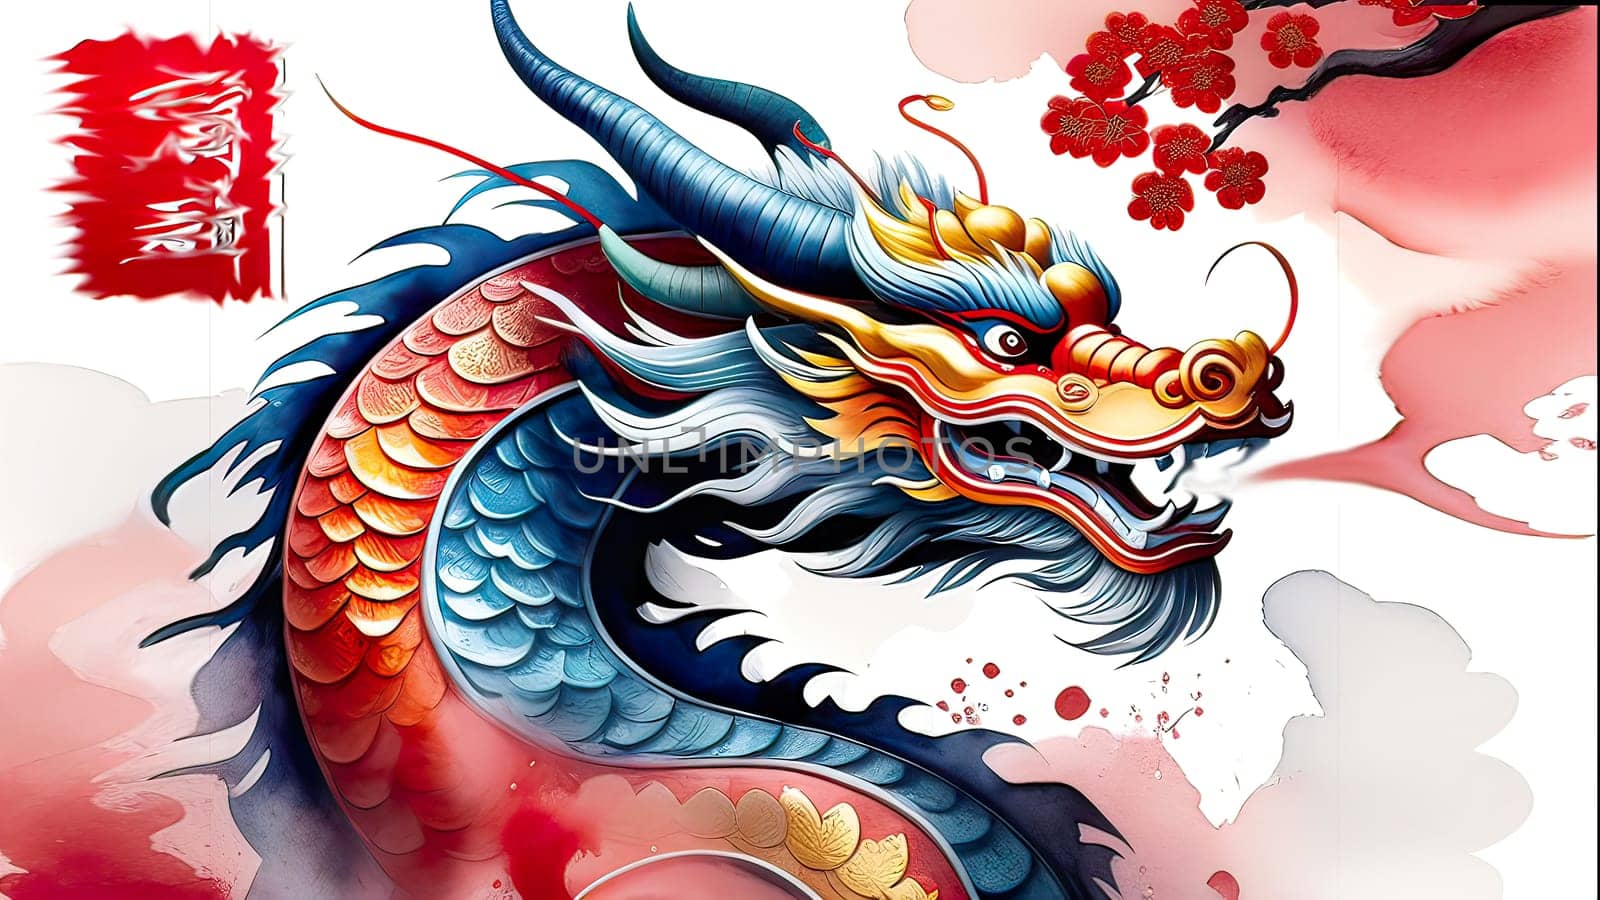 chinese new year concept with dragon background by Proxima13